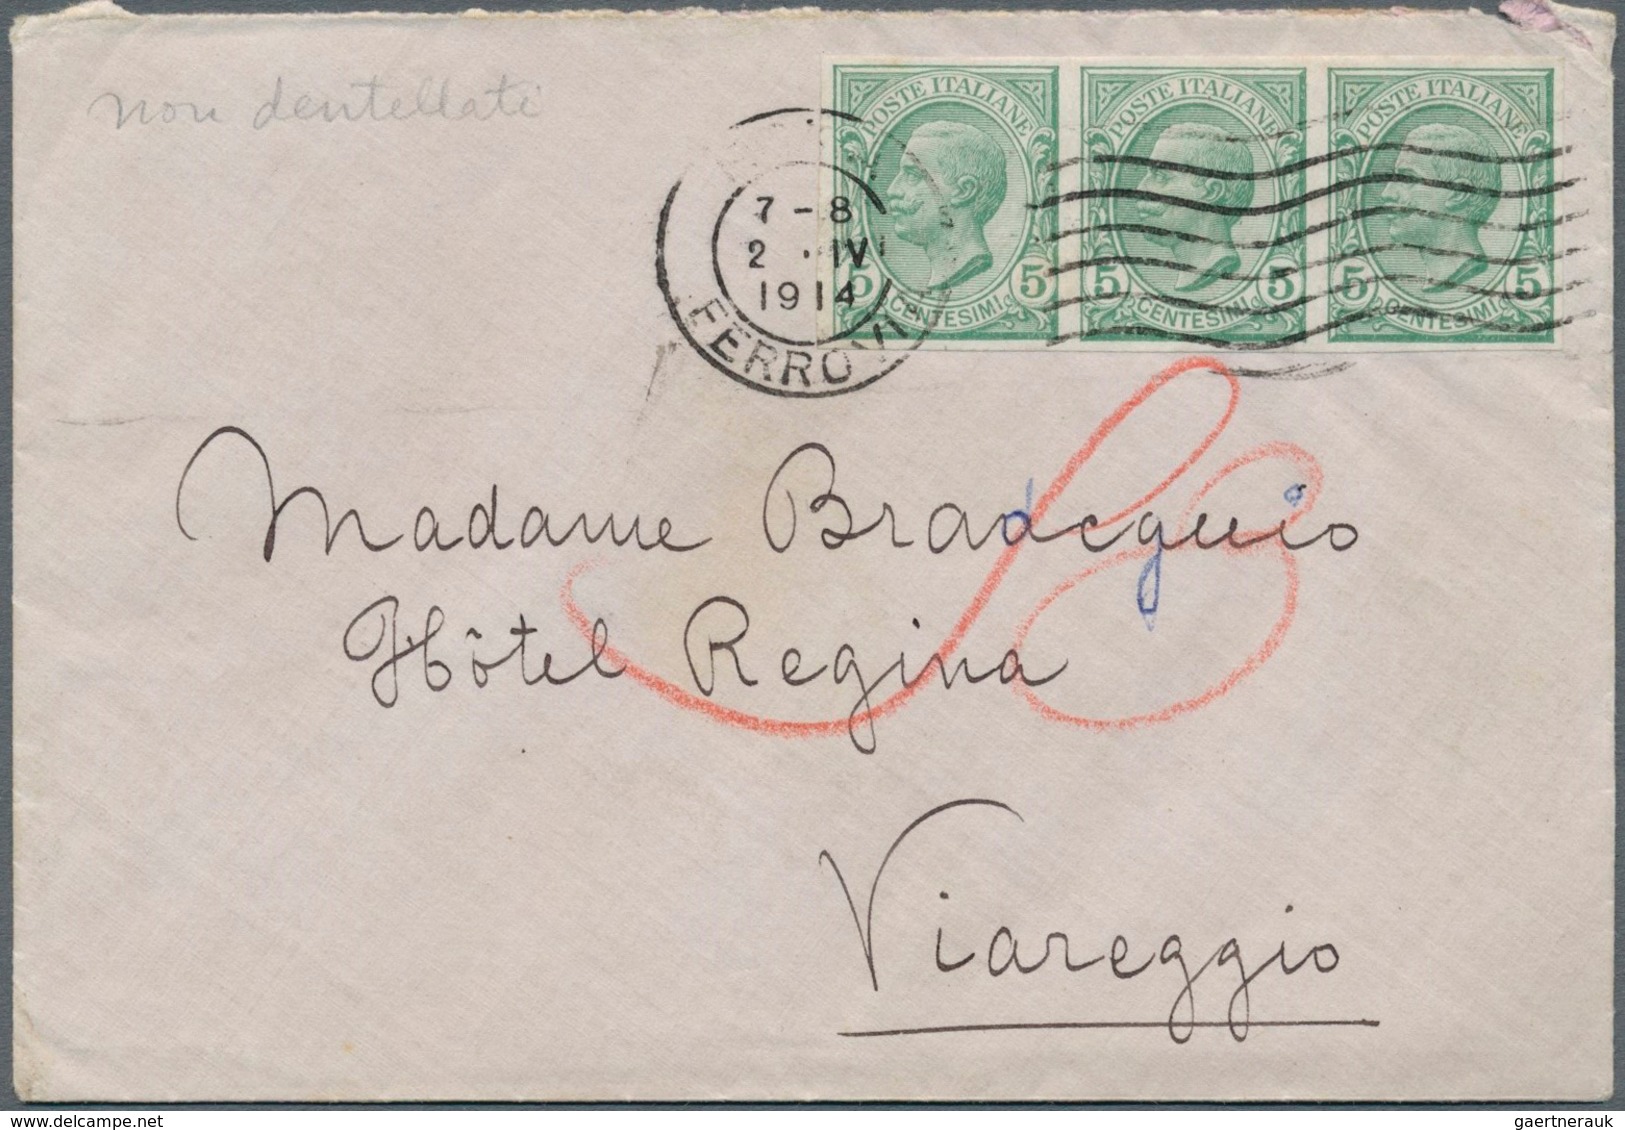 Italien: 1906 5 C. Green Unperforated, Strip Of Three On Letter Tied By Machine Cancel ROMA FERROVIA - Afgestempeld